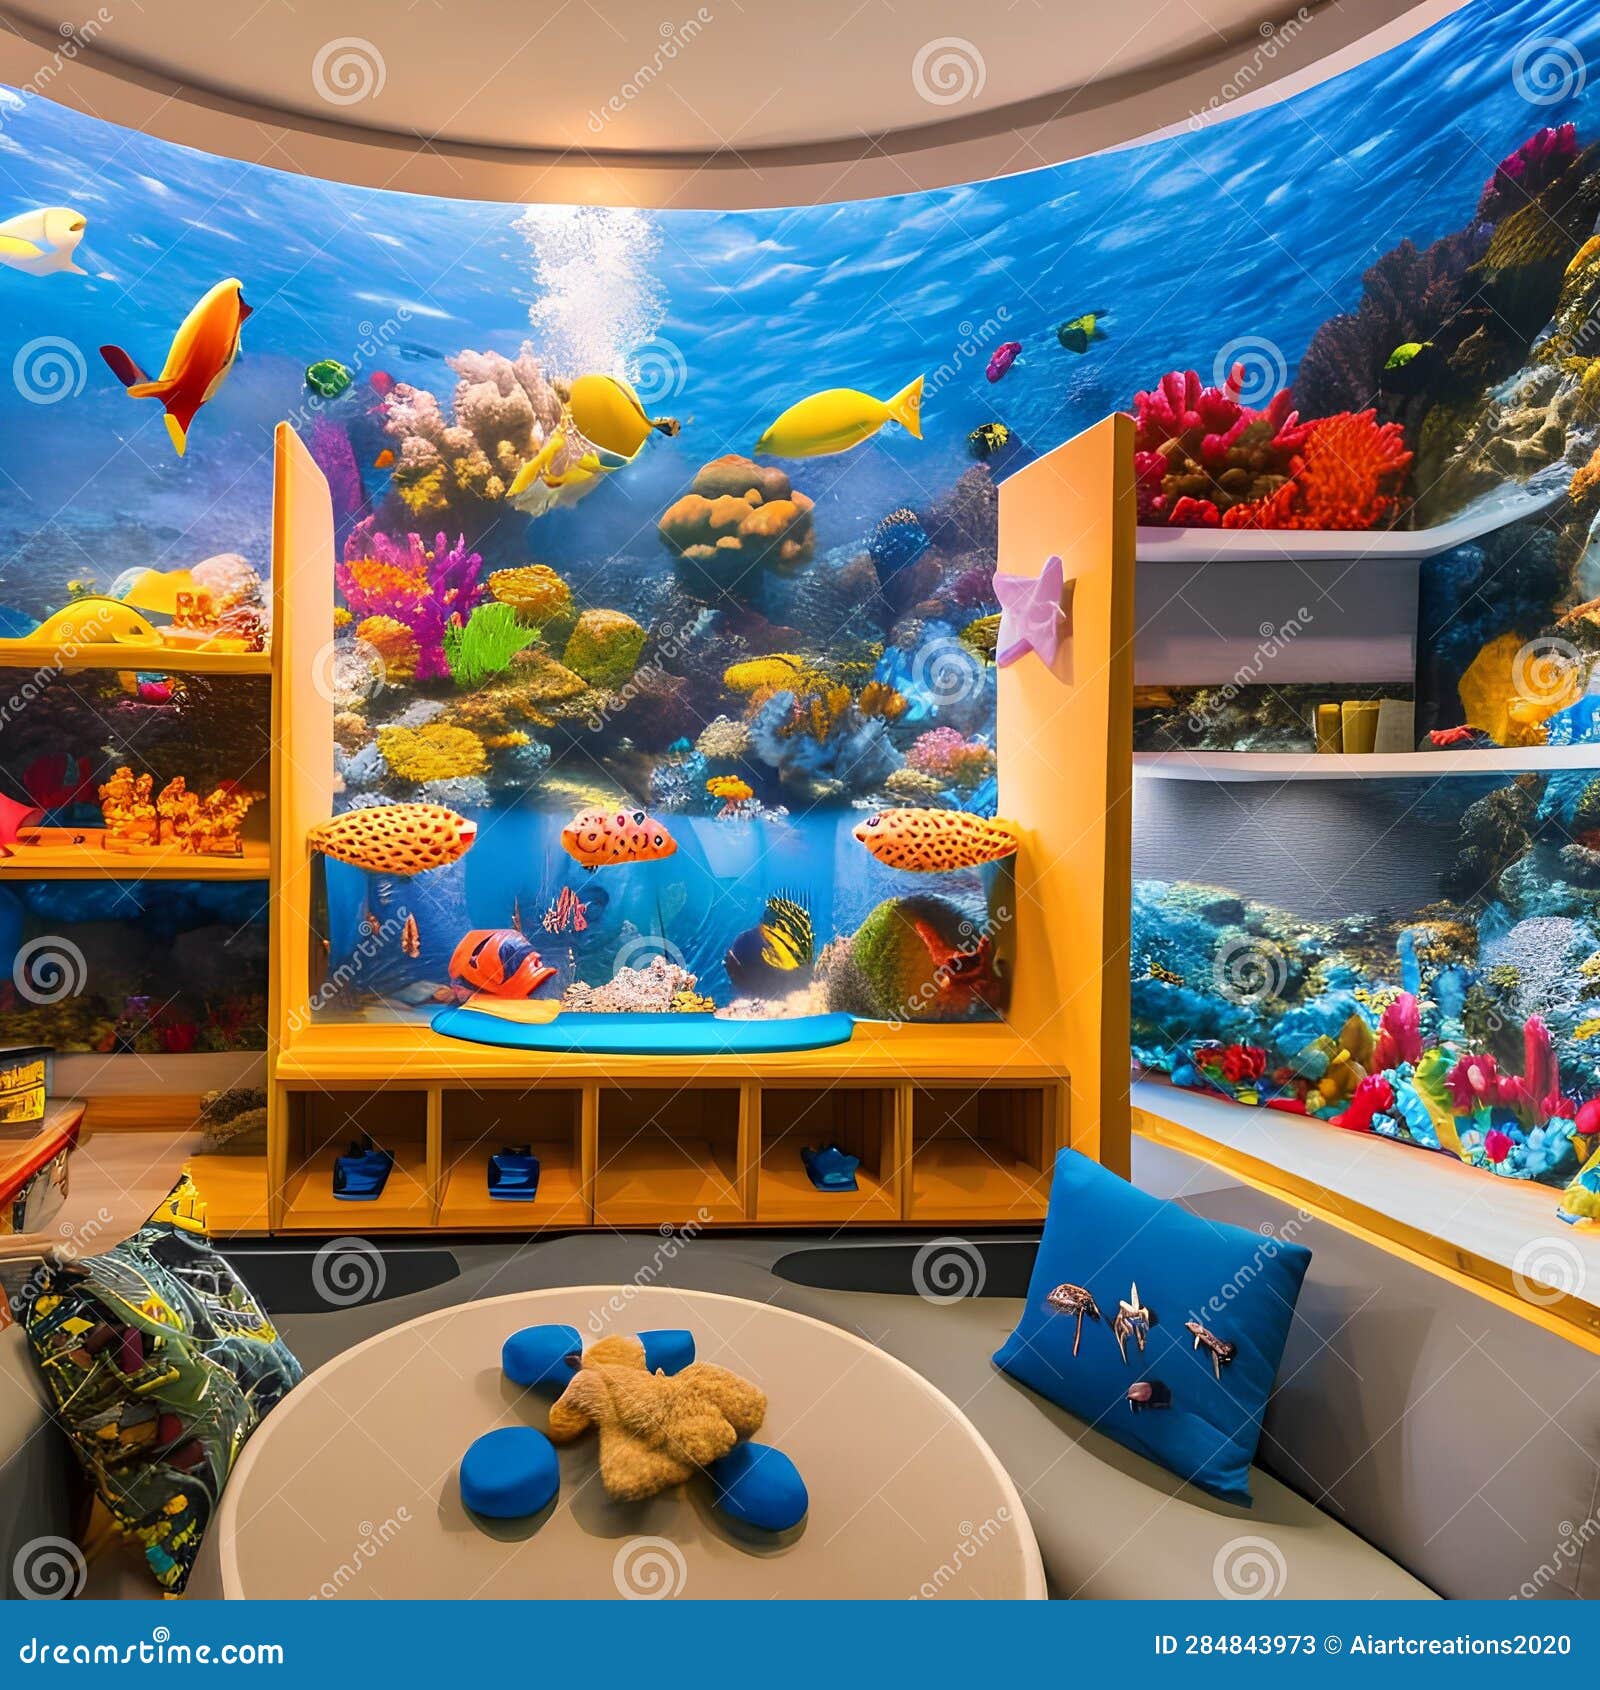 Whimsical Underwater Playroom: a Playroom with an Underwater Theme